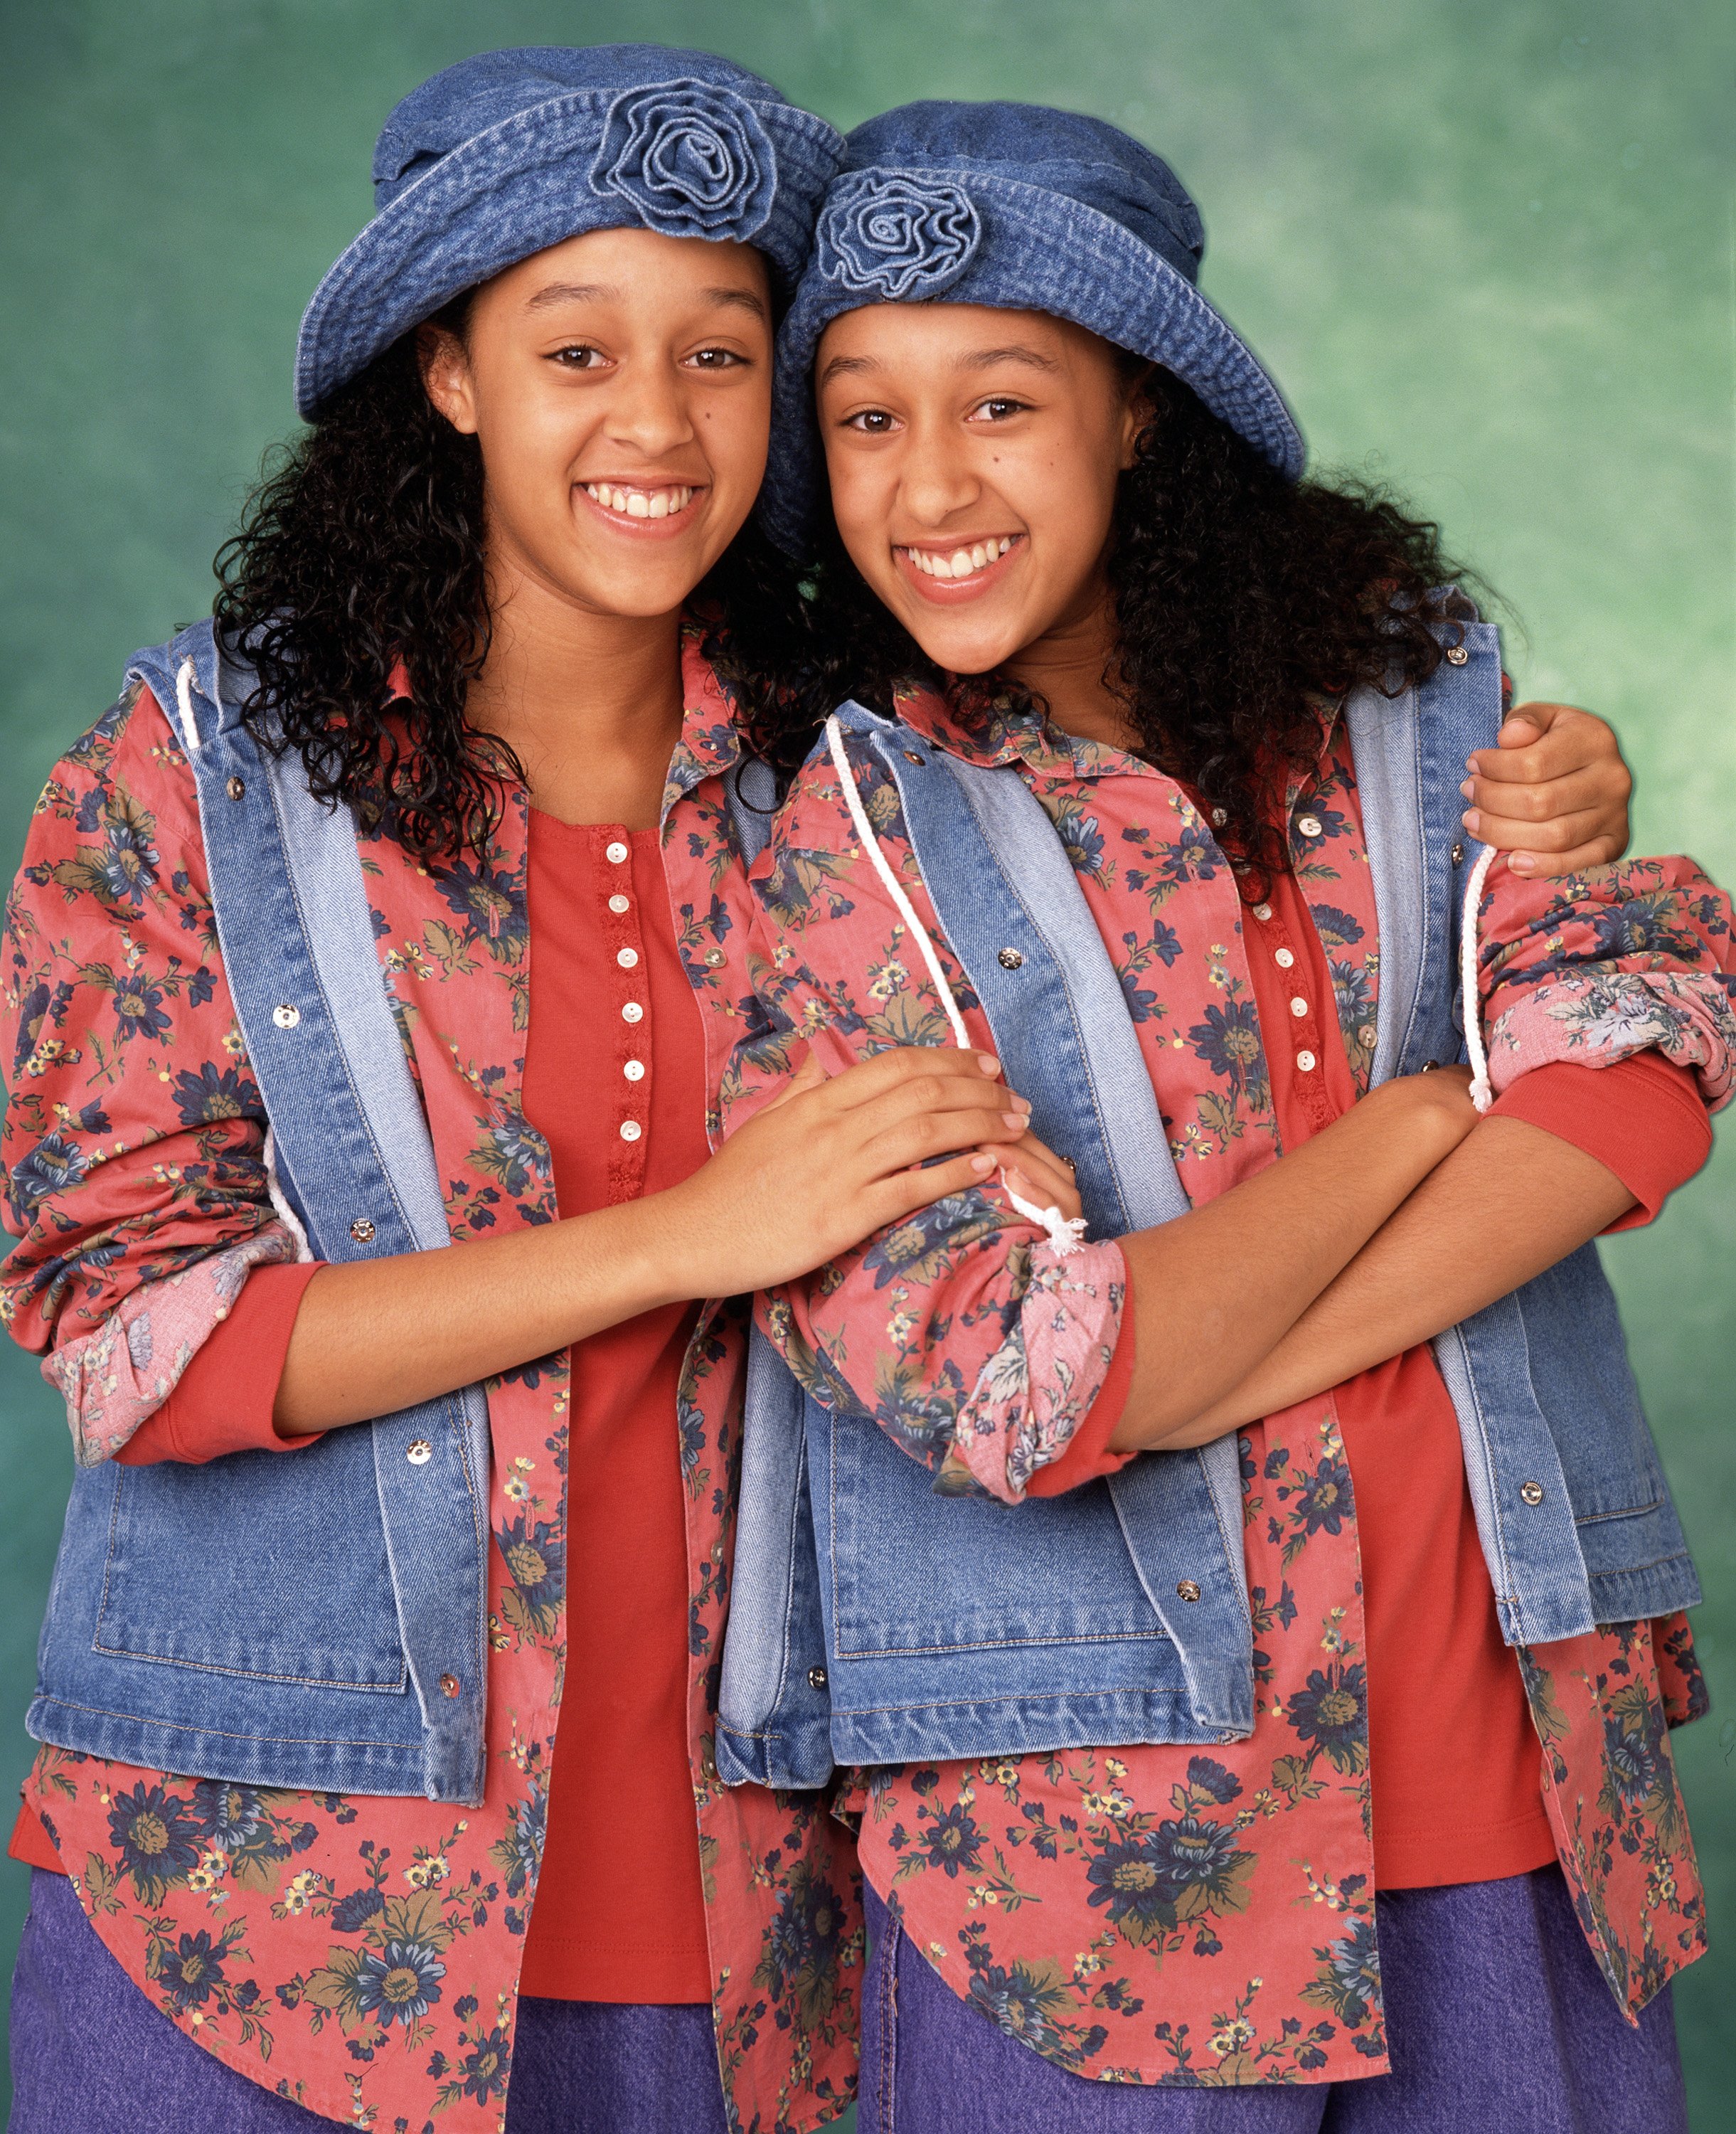 Tia Mowry and Tamera Mowry in Season one of "Sister, Sister" | Source: Getty Images